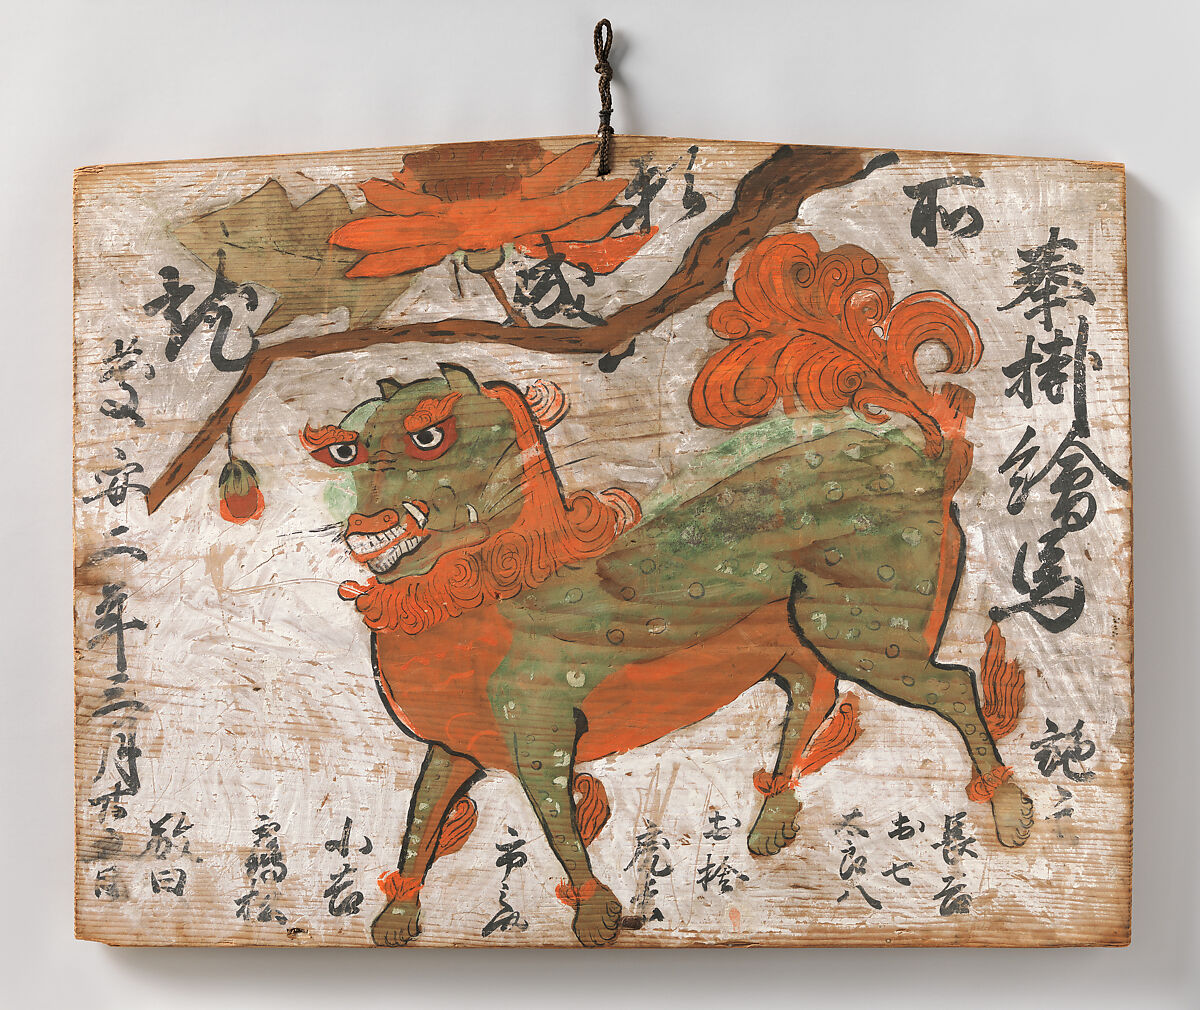 Ema (Votive Painting) of Chinese Lion and Peony Tree, Ink and color on wood, Japan 